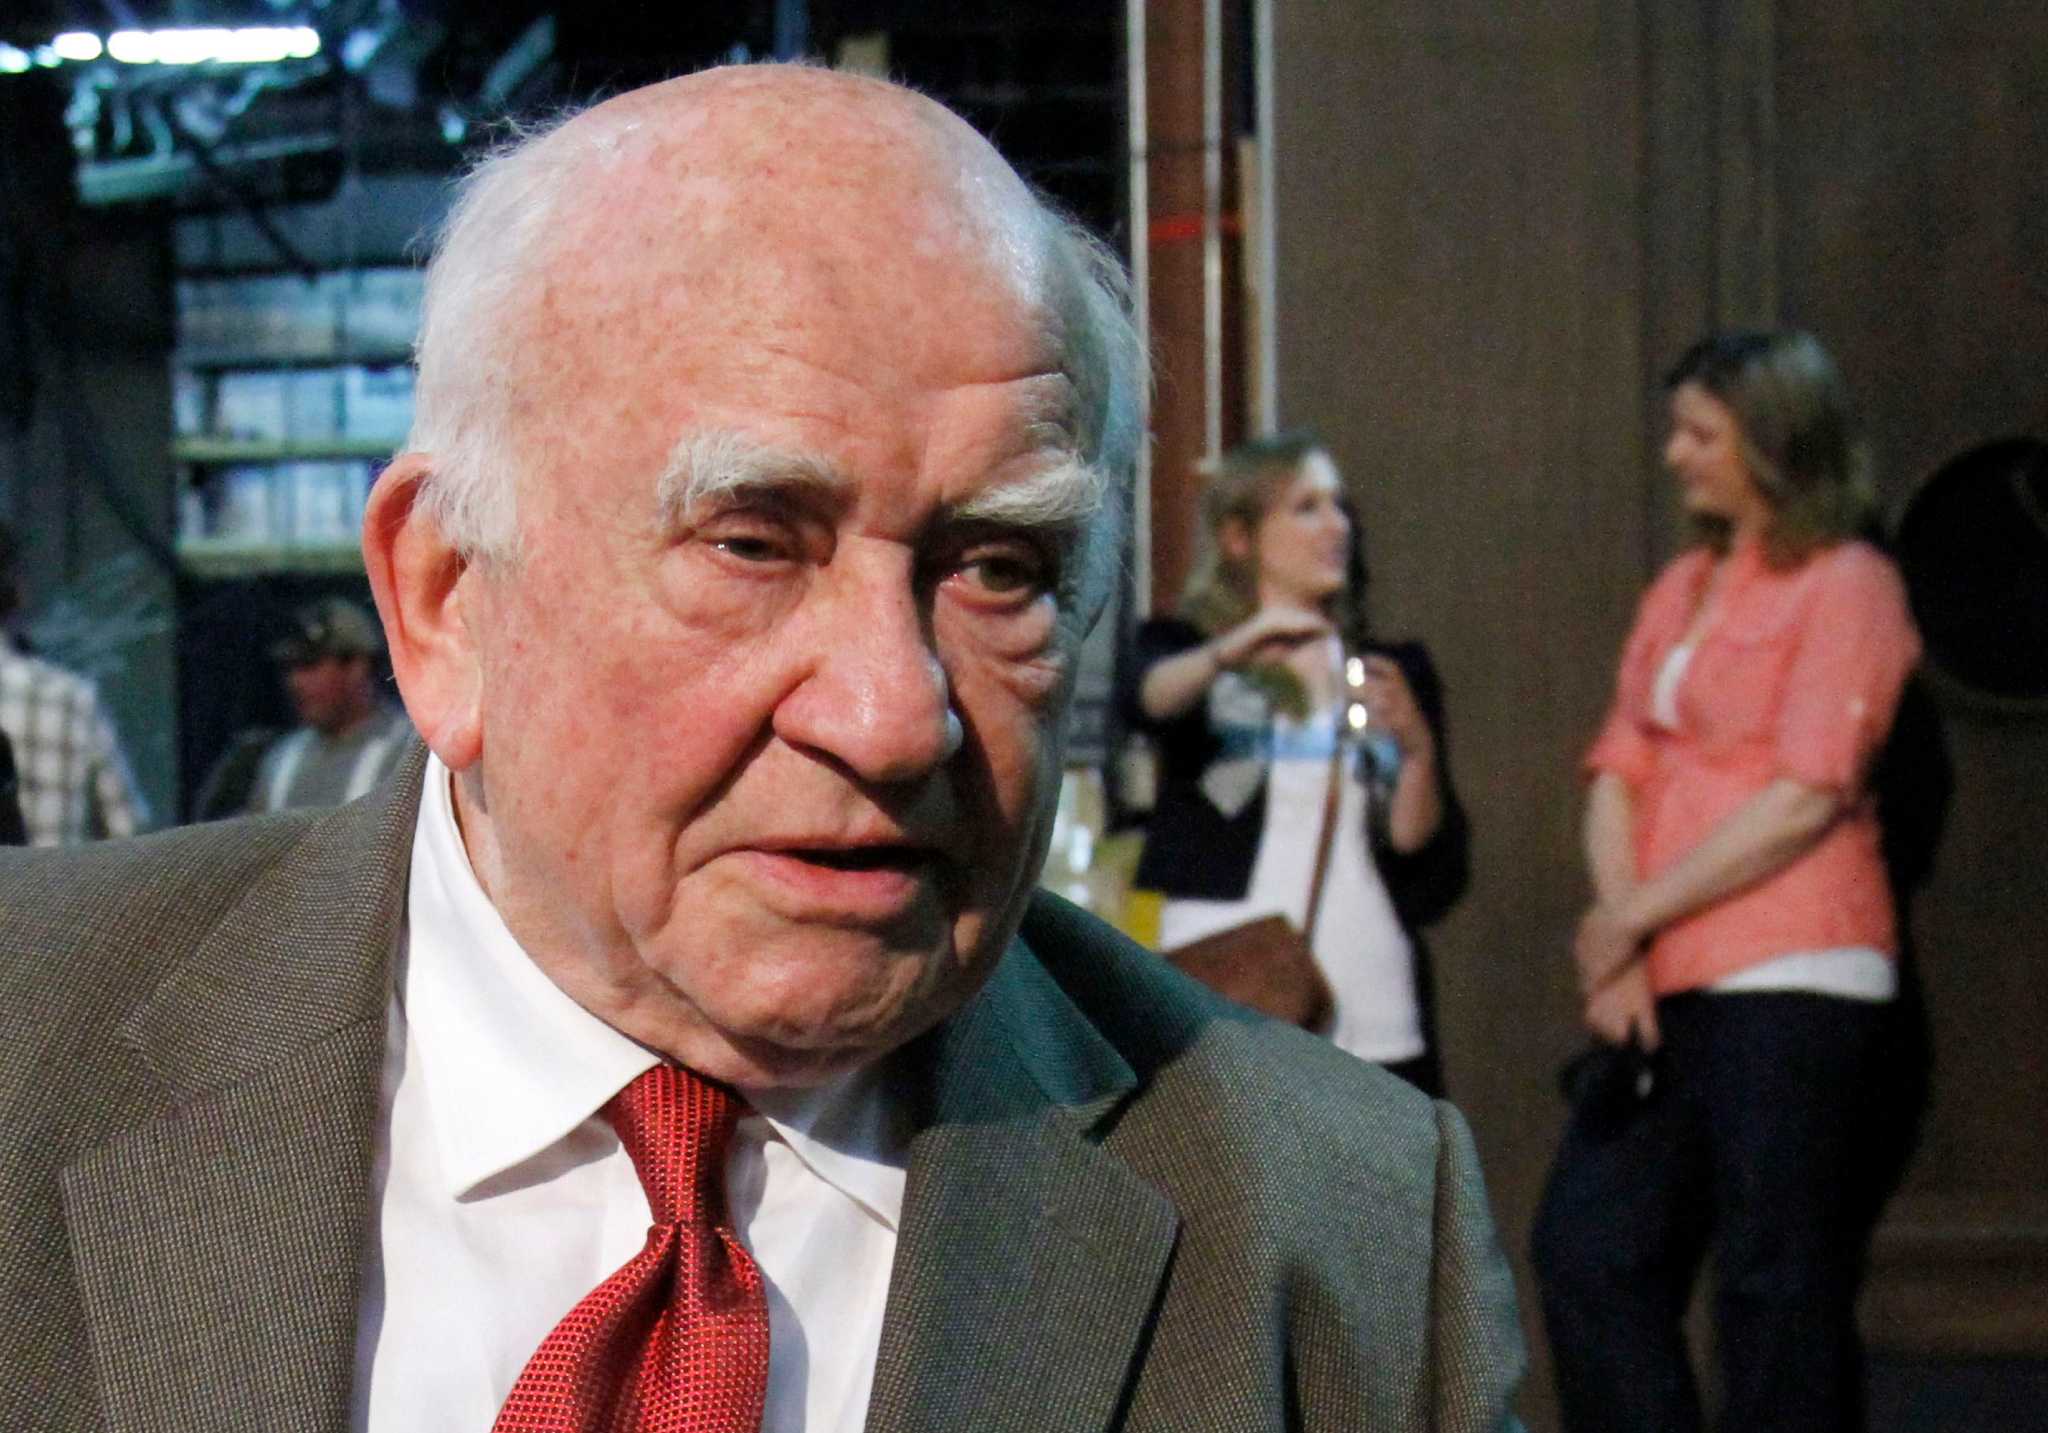 Actor Ed Asner 83 treated for exhaustion in Ind Times 